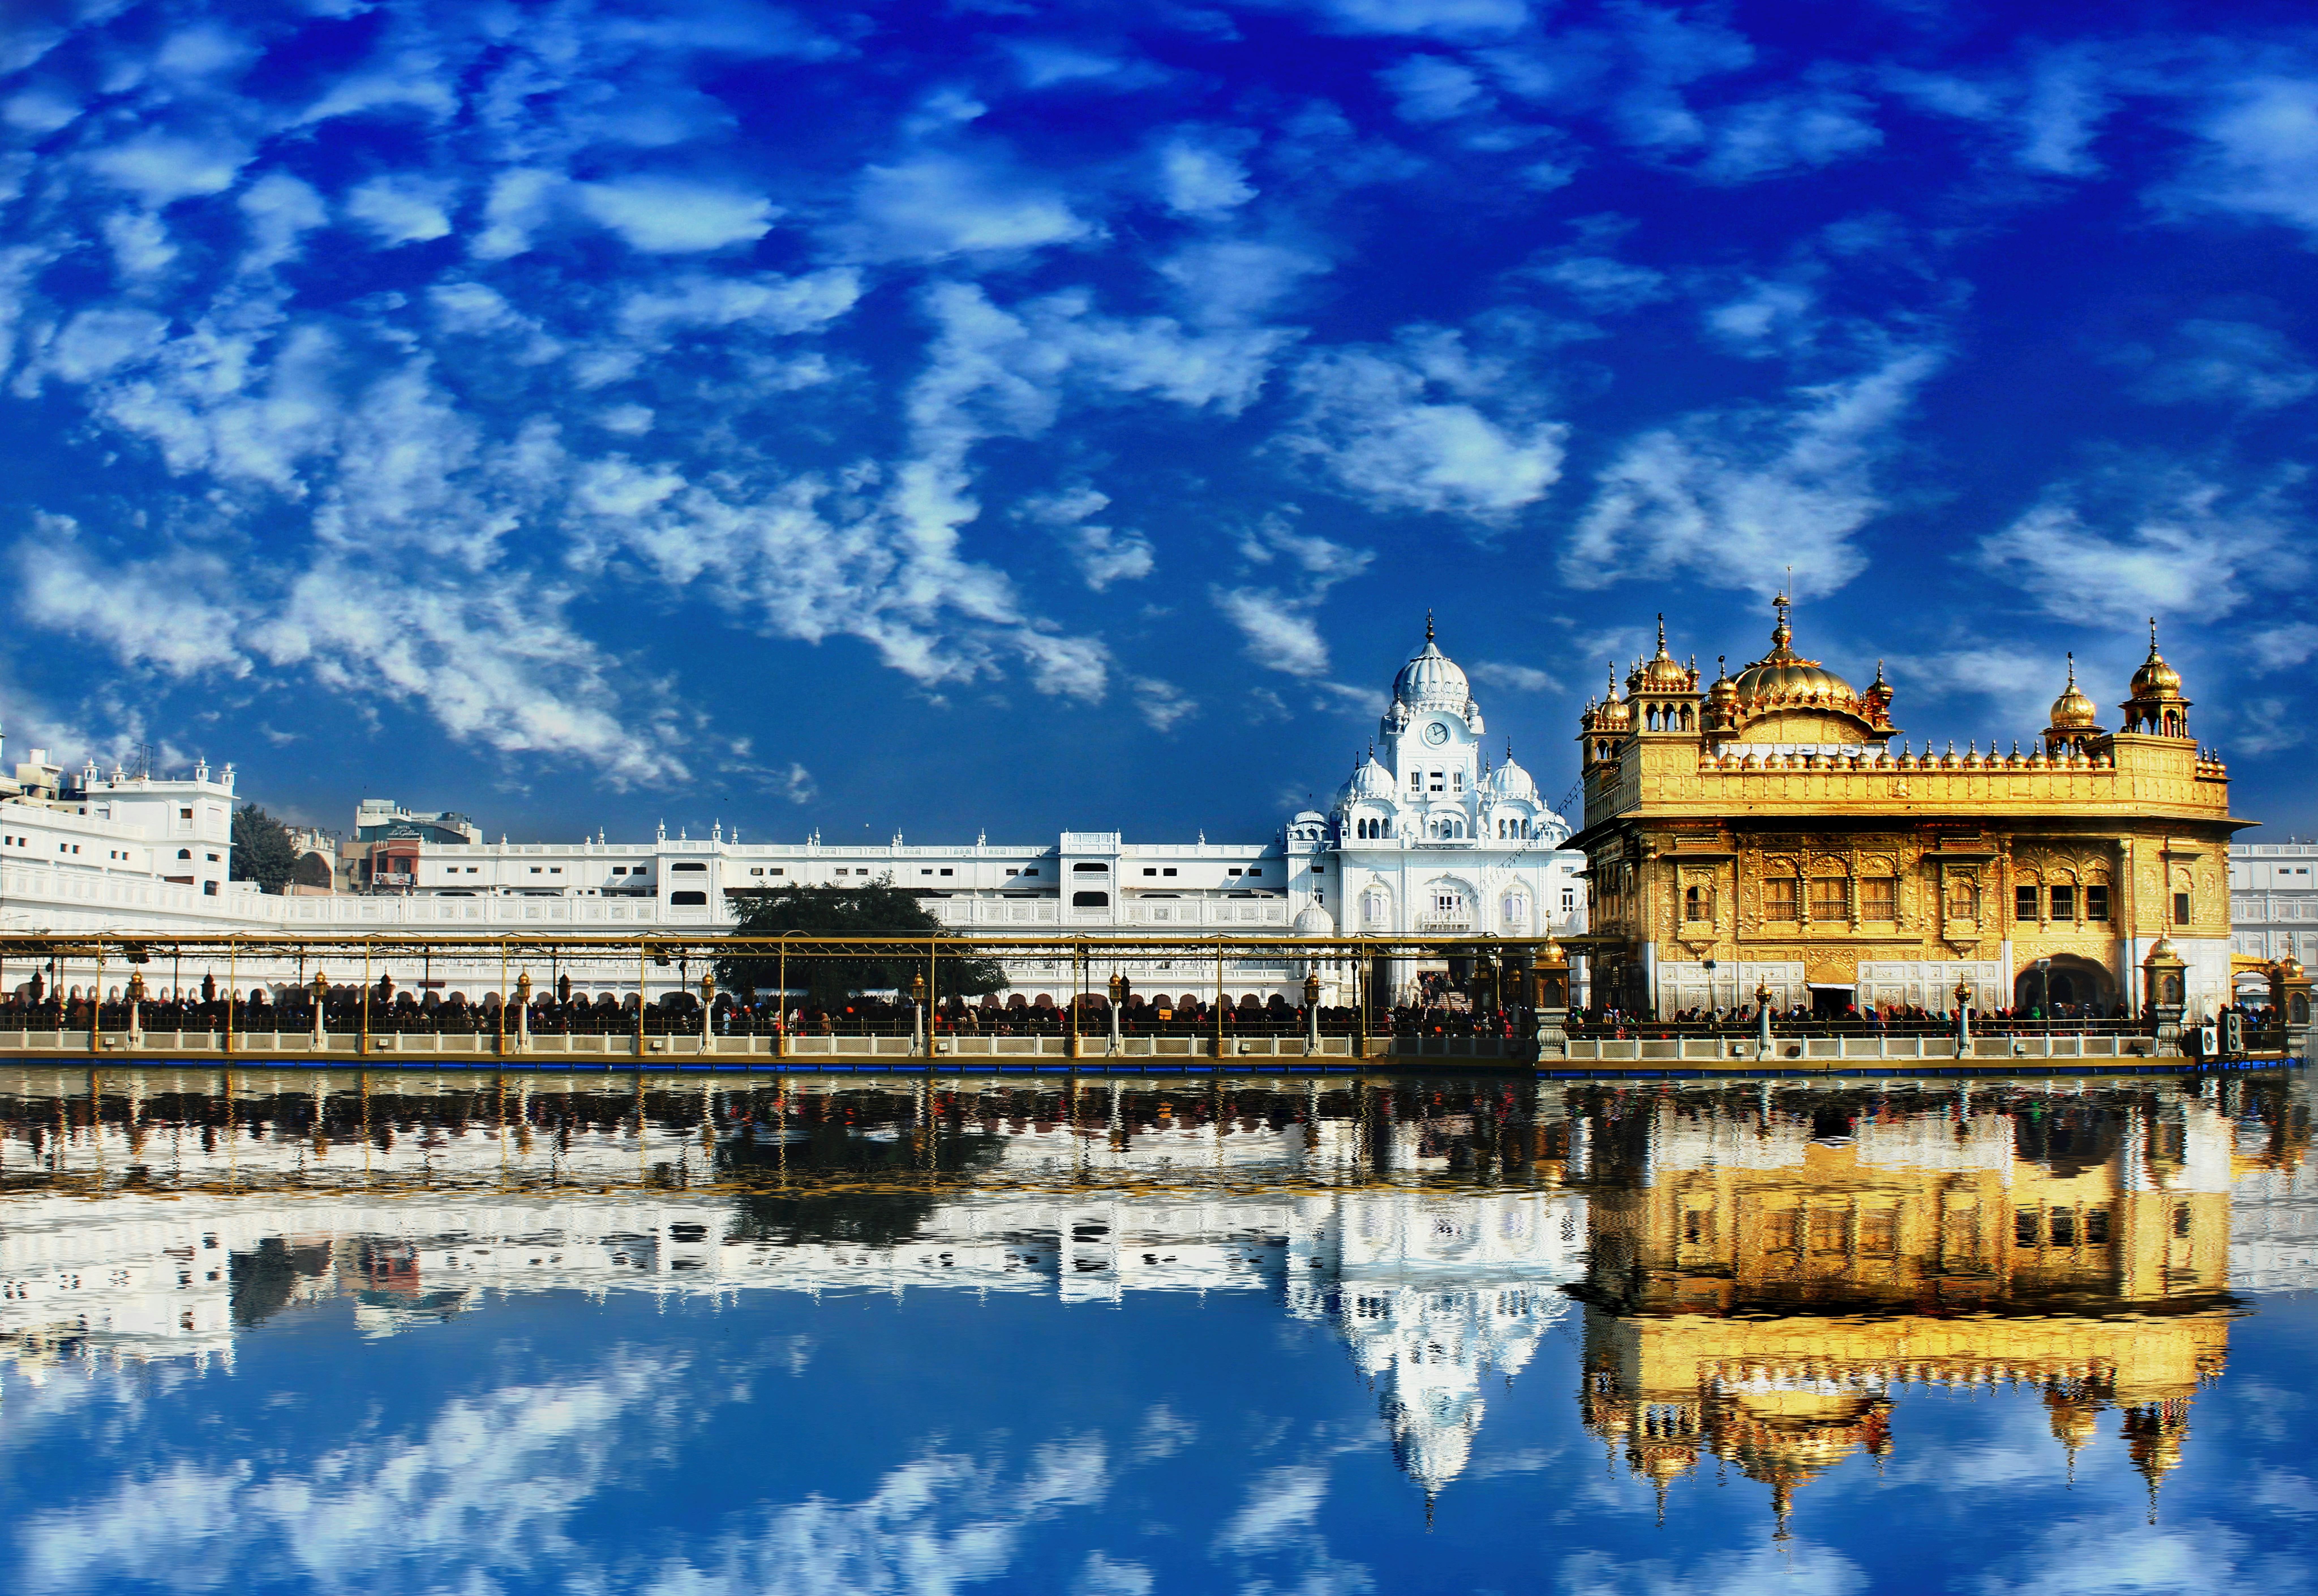 The Golden Temple, an important aspect of the history of amritsar

image